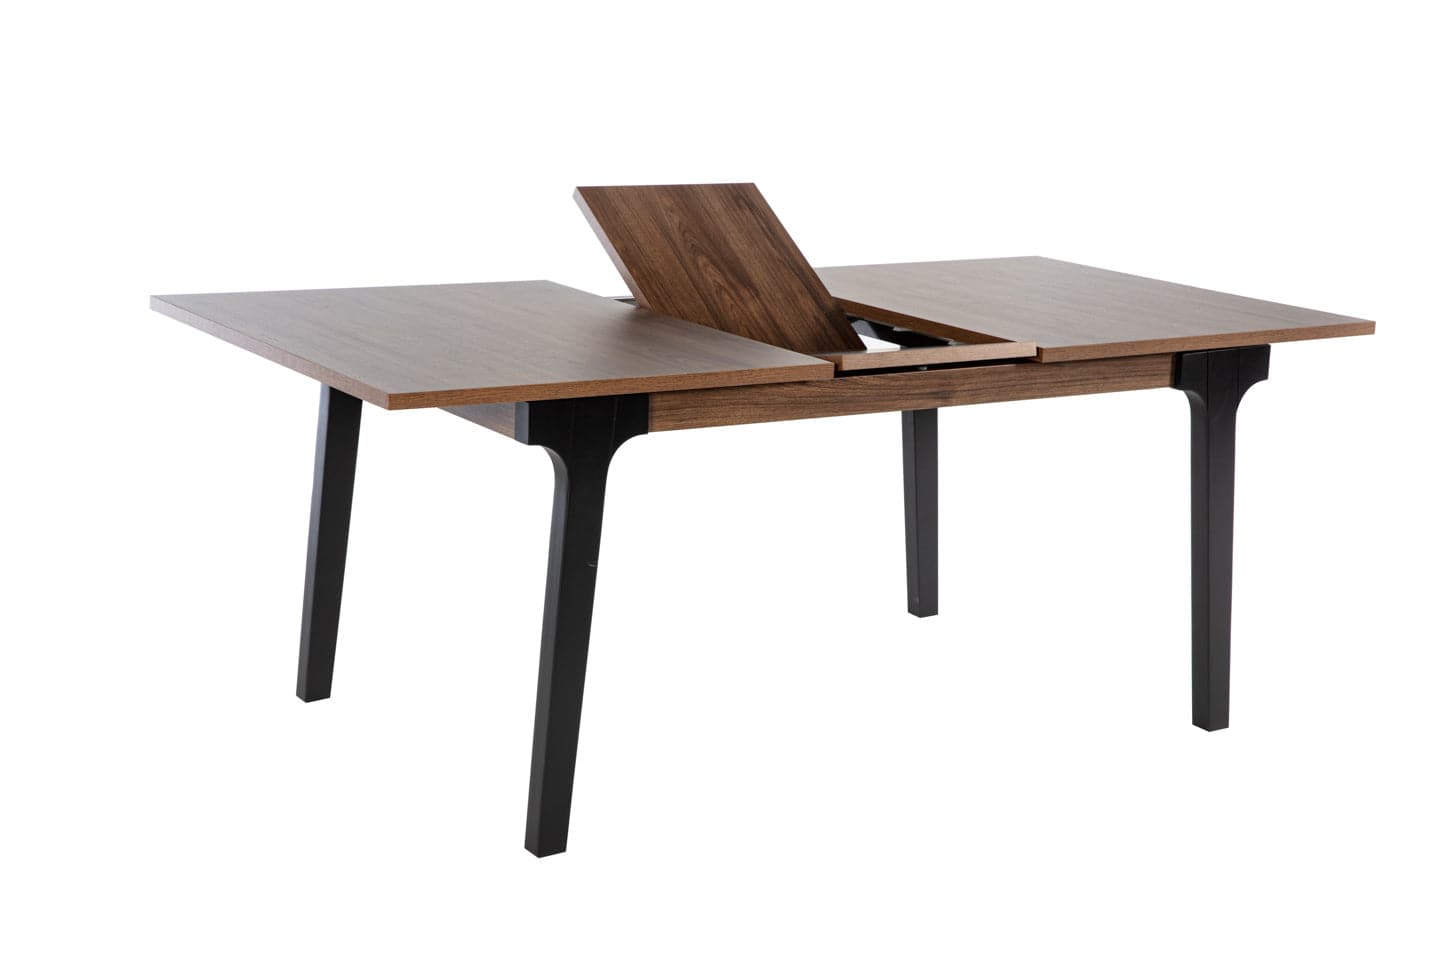 Kennedy Expandable Dining Table